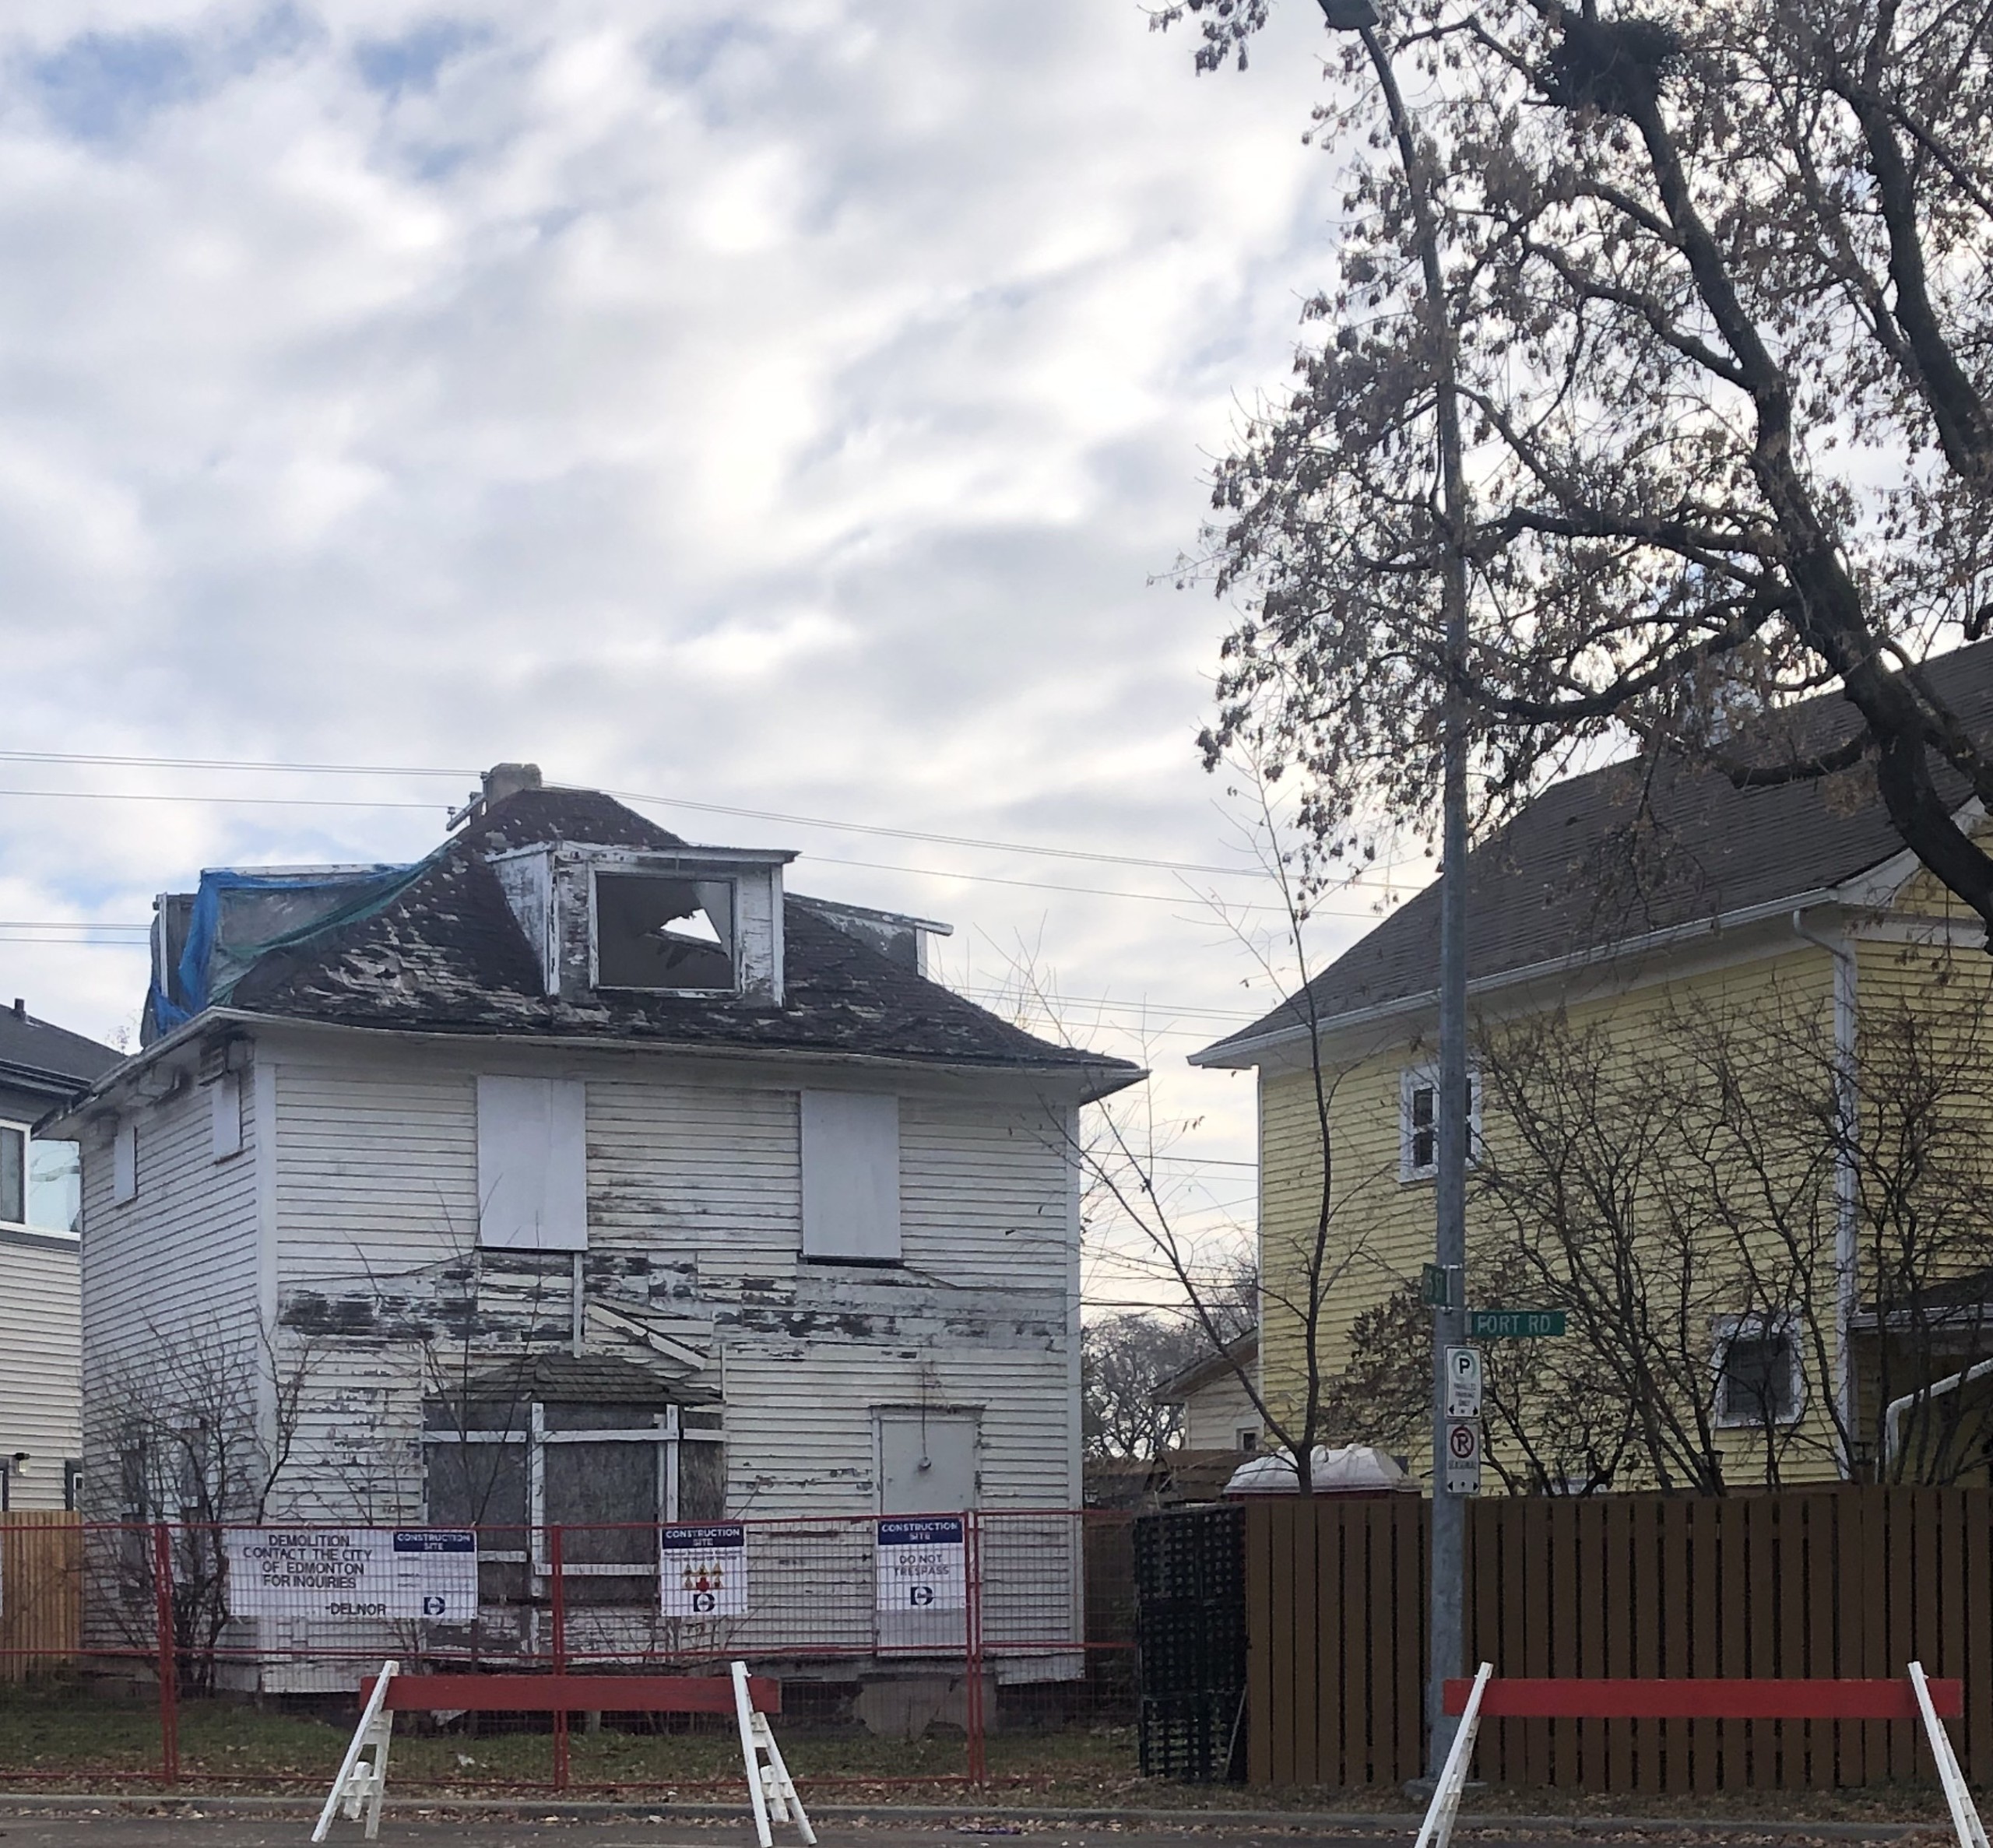 City Council approves increased taxes for derelict properties